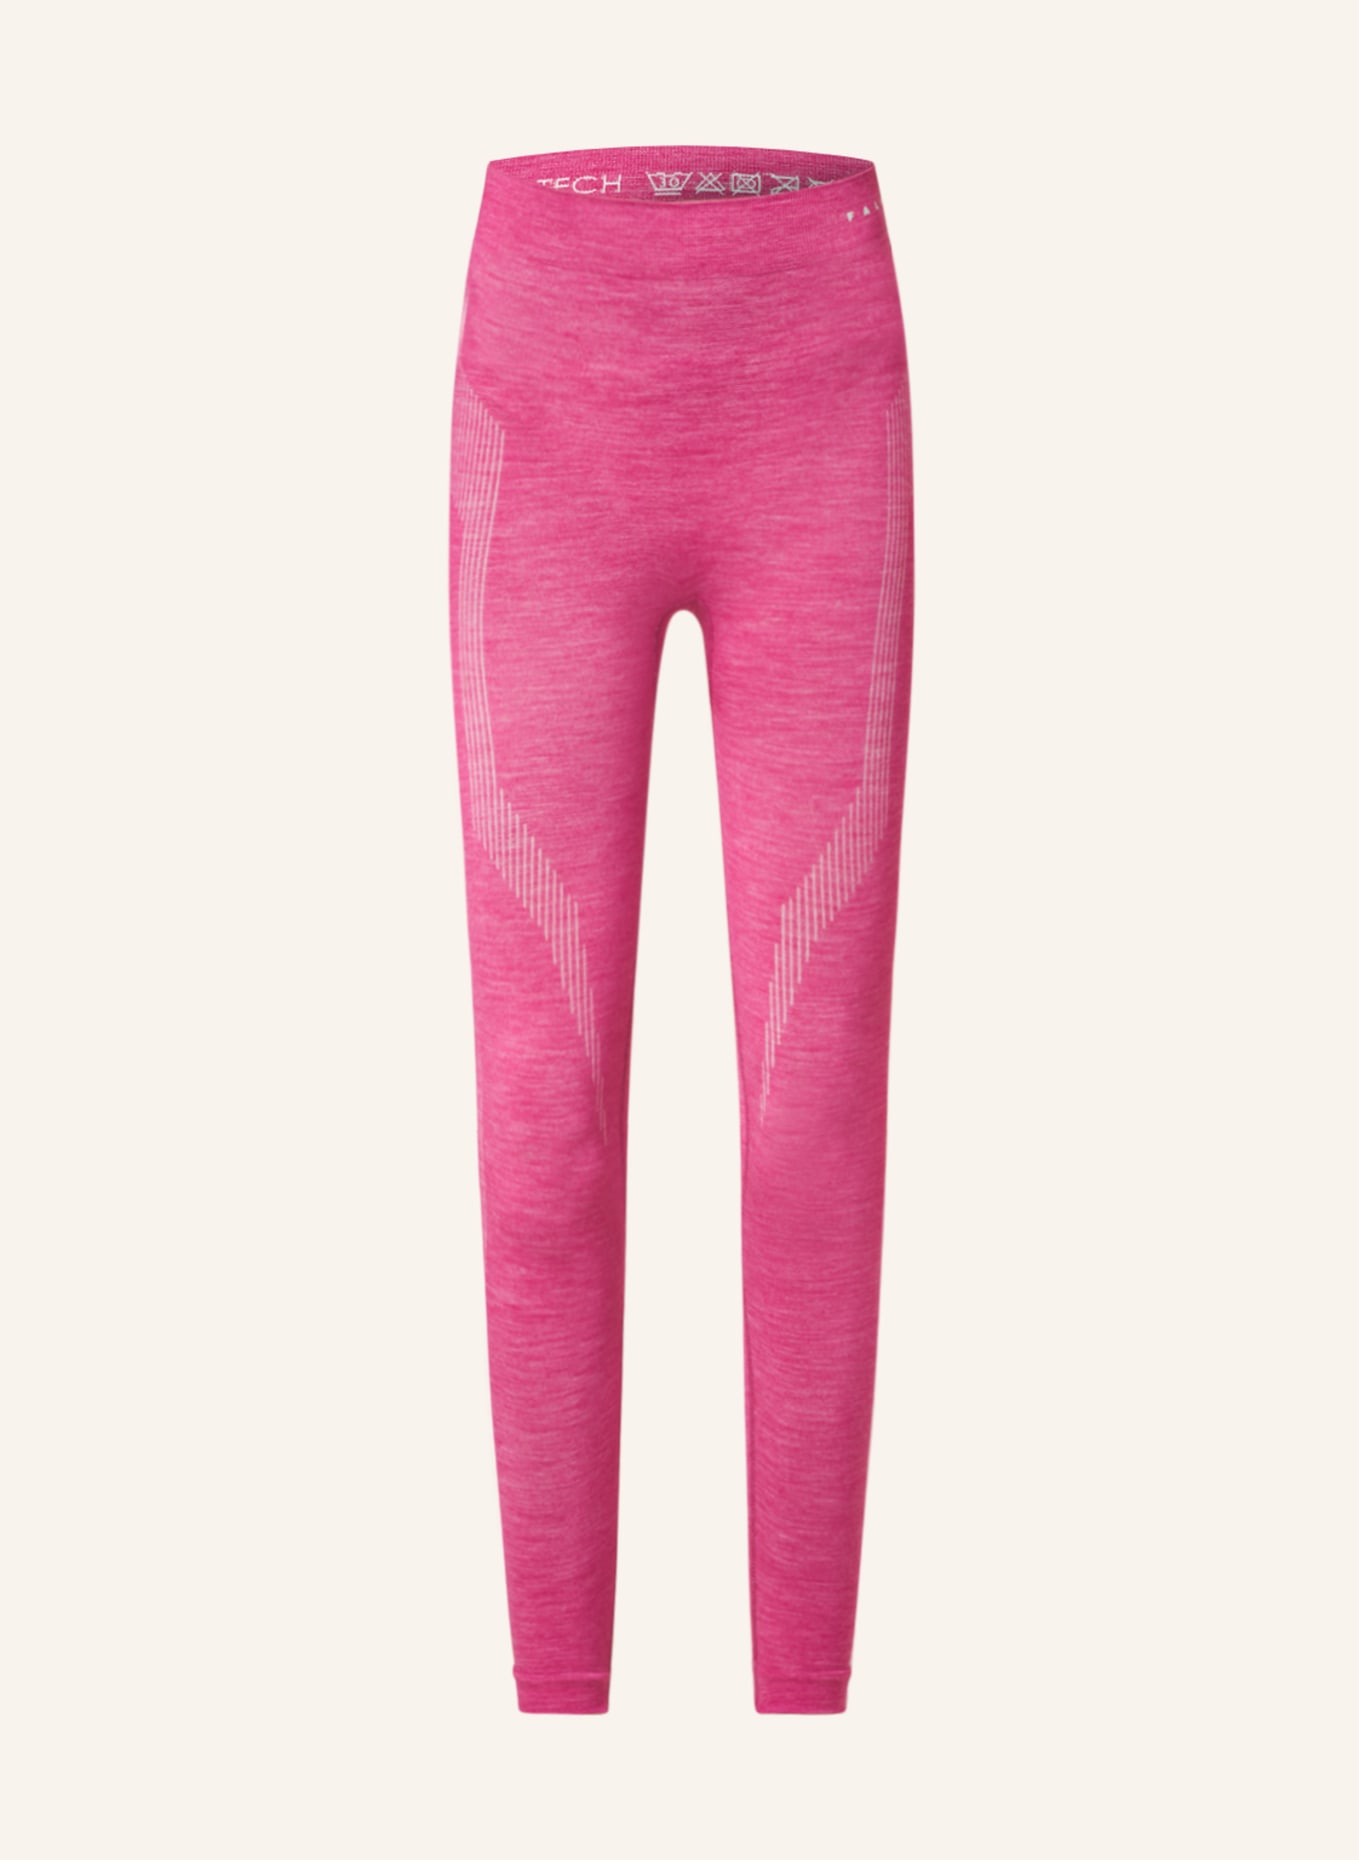 FALKE Functional base layer trousers WOOL-TECH with merino wool, Color: PINK (Image 1)